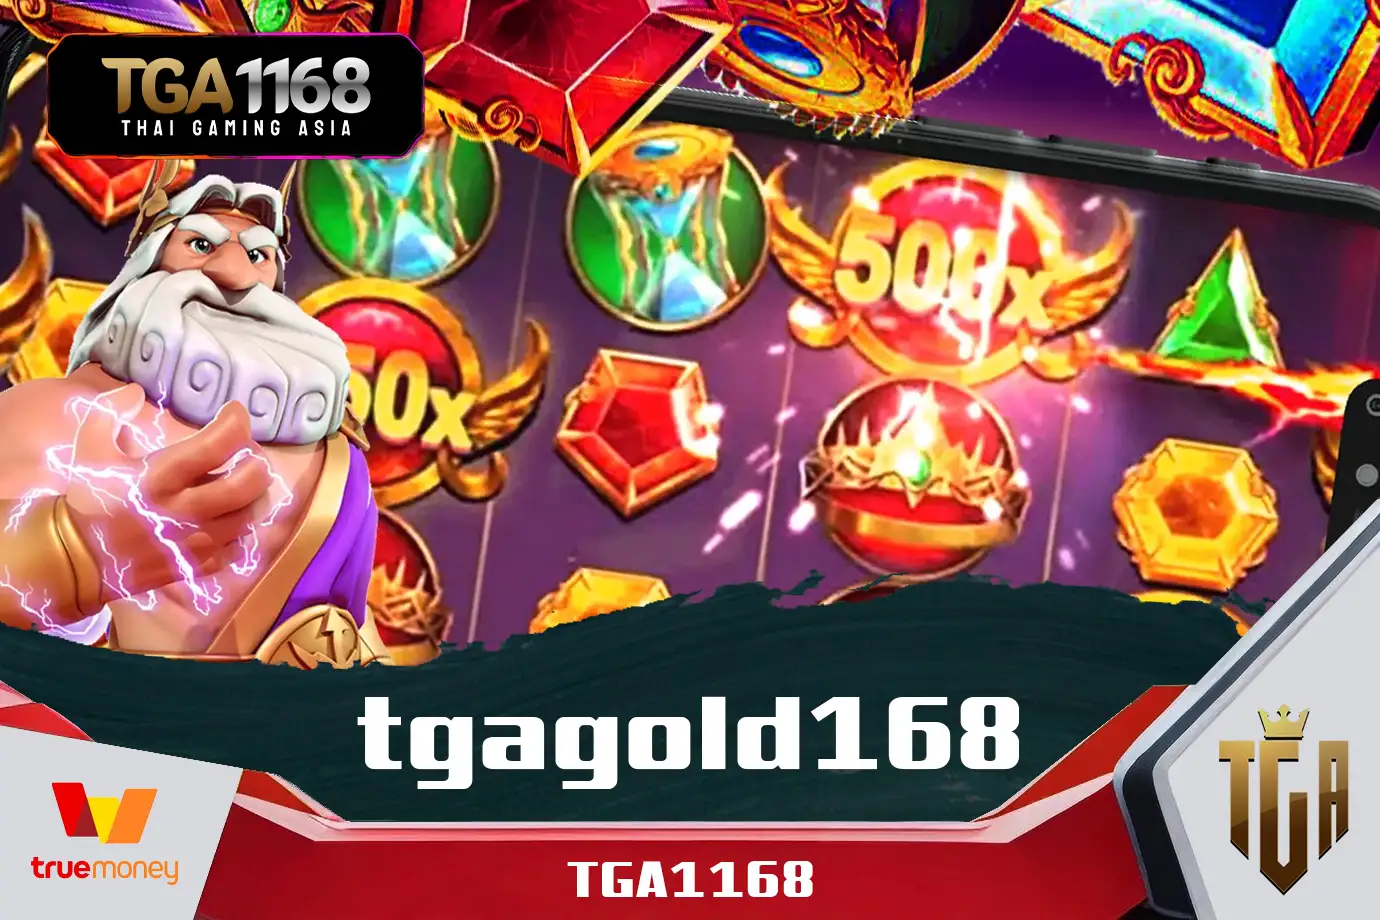 tgagold168